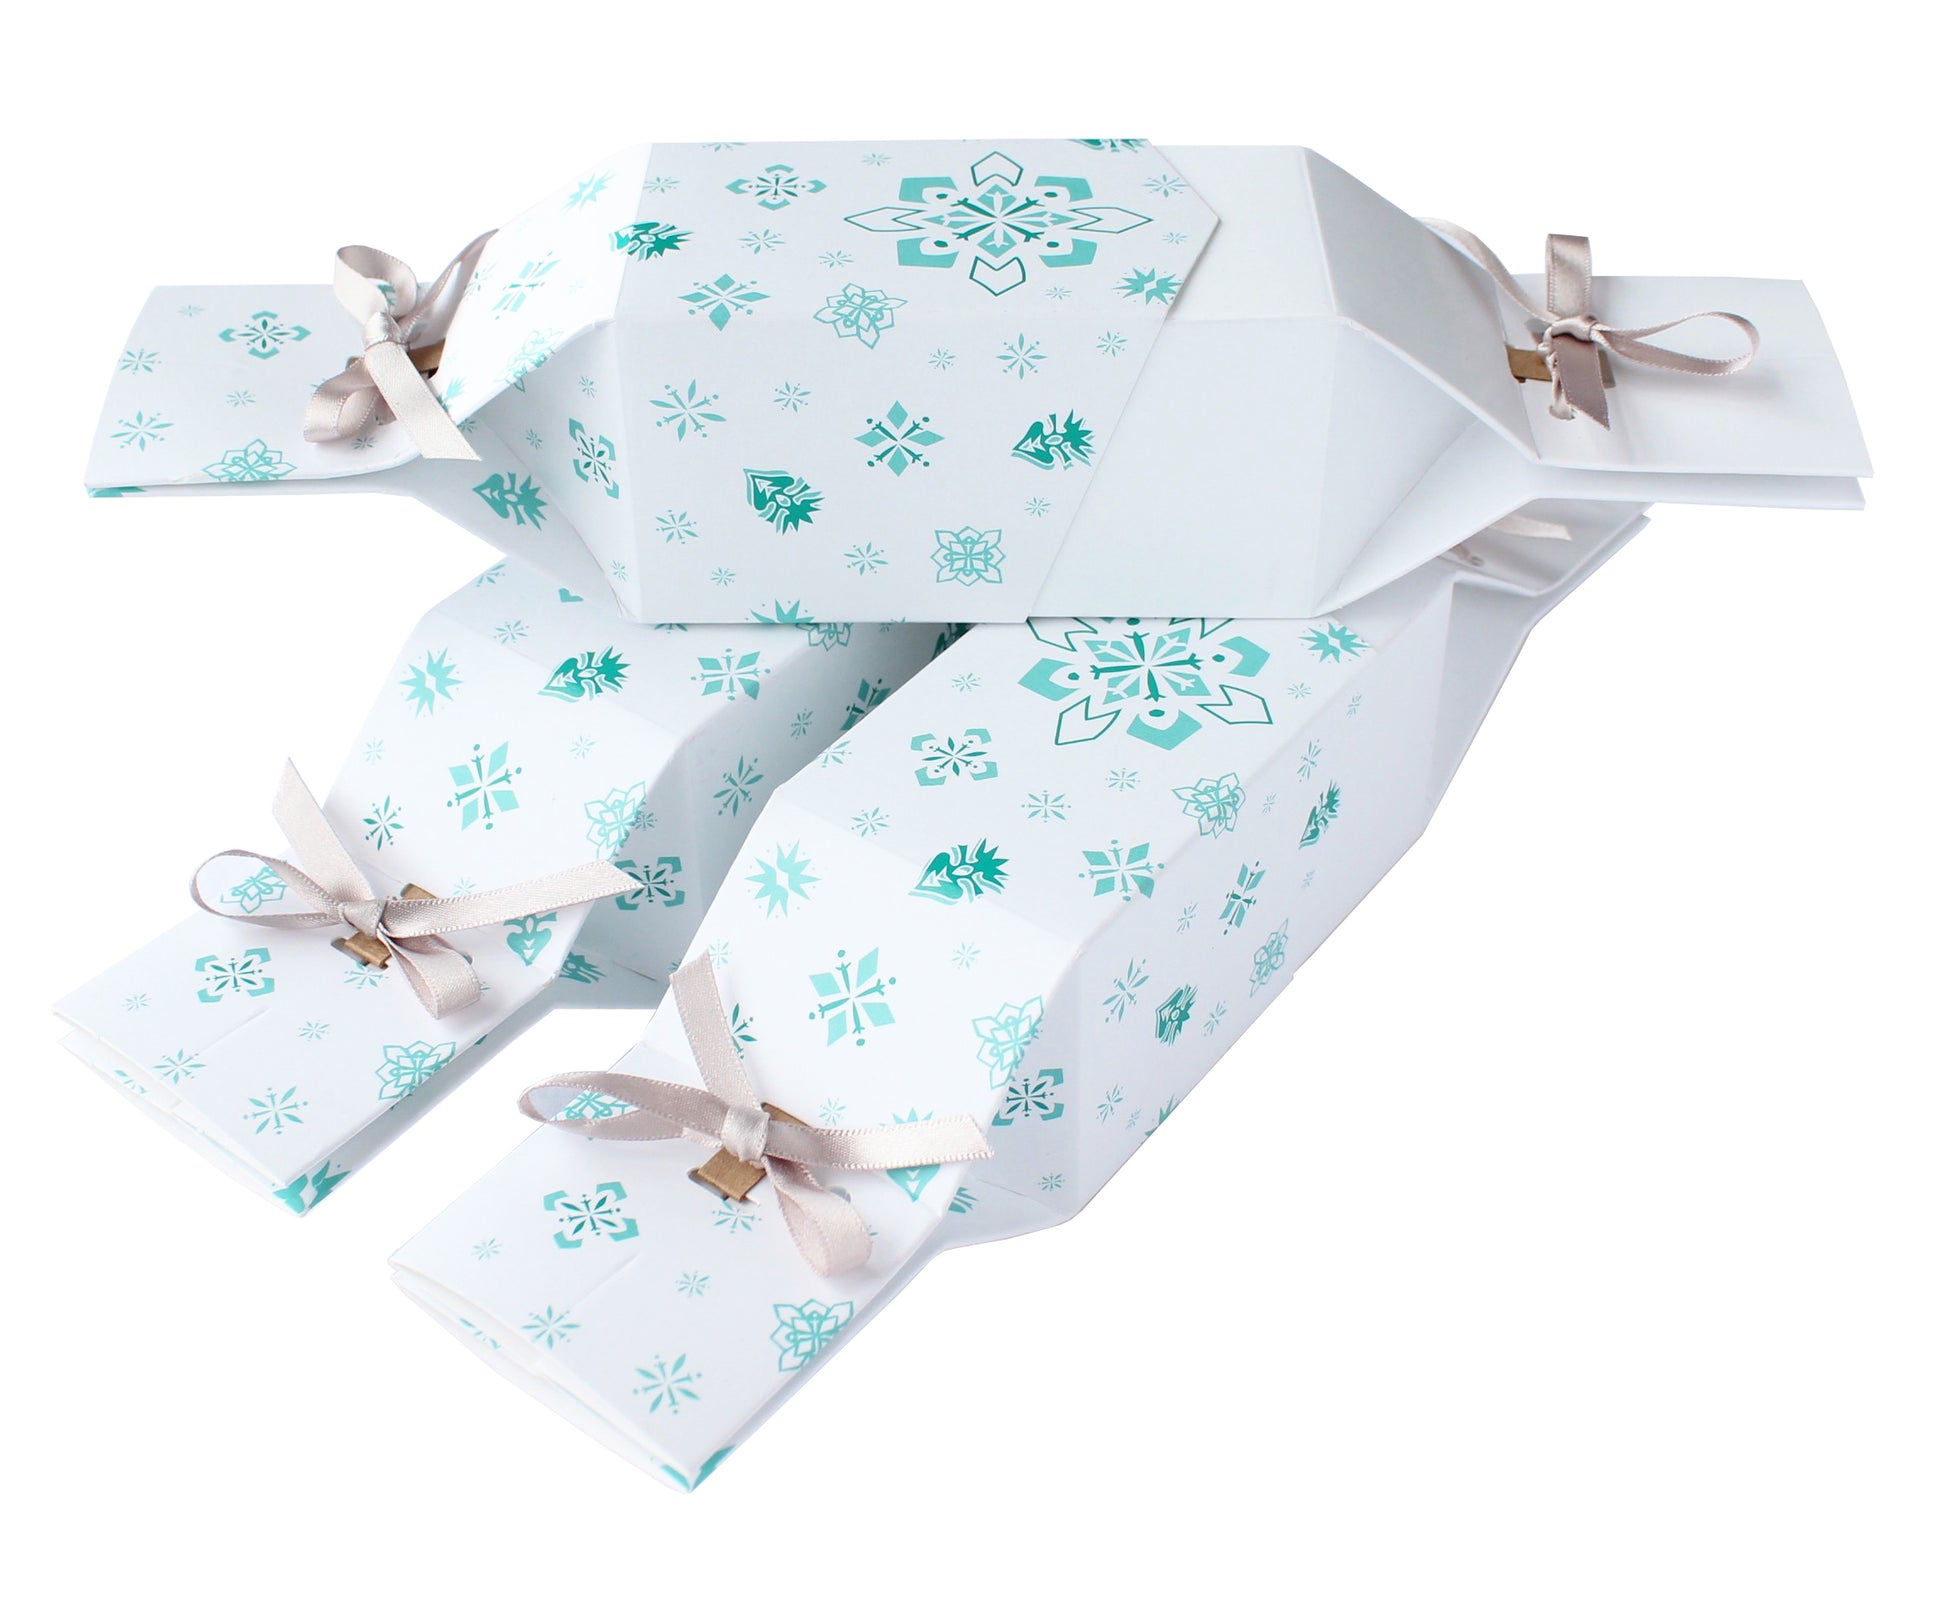 Reusable Christmas Crackers - Sustainable and festive choice for planet-conscious holiday traditions